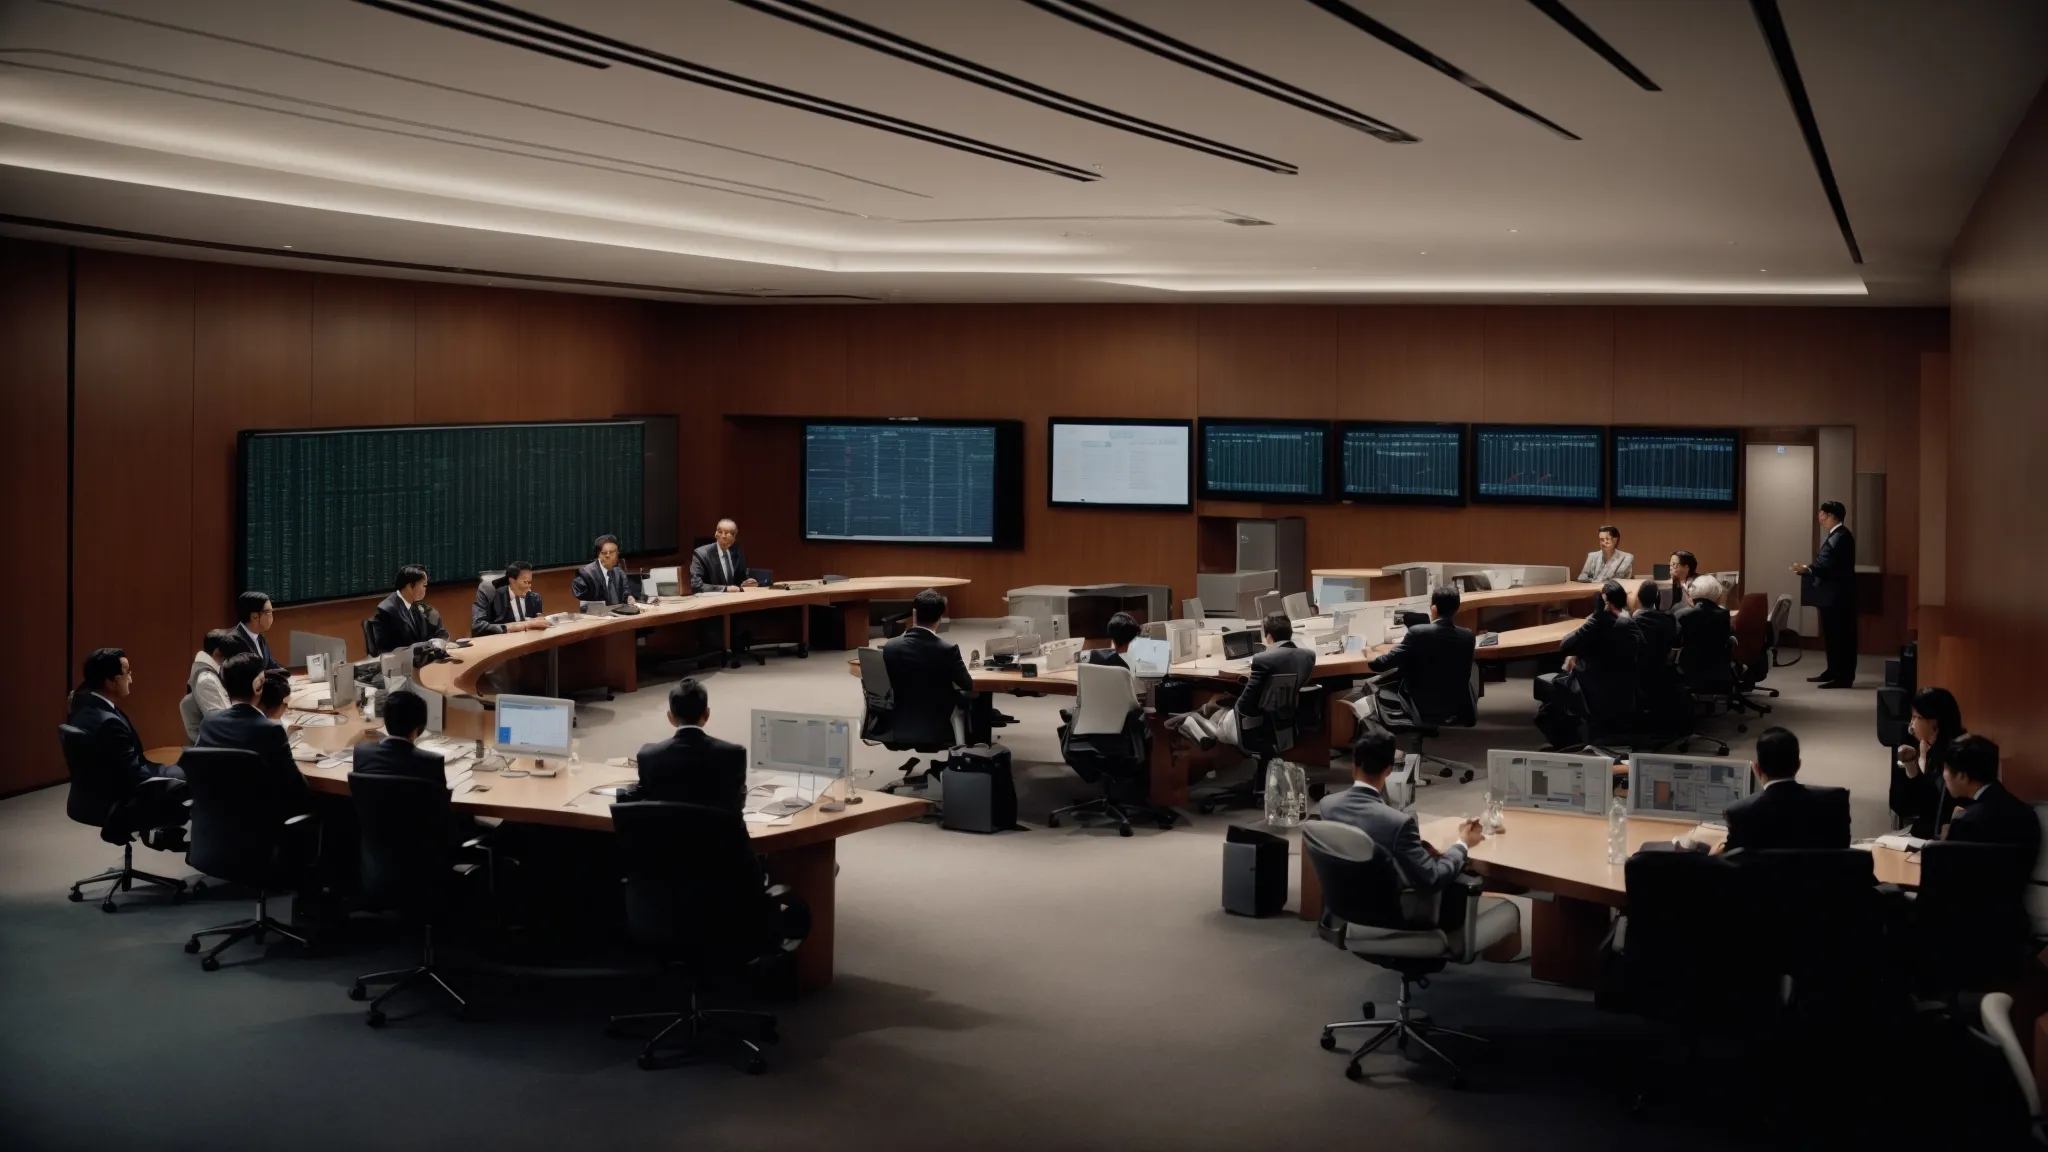 a board room with a long table and high-tech computers where business professionals are analyzing data management software.